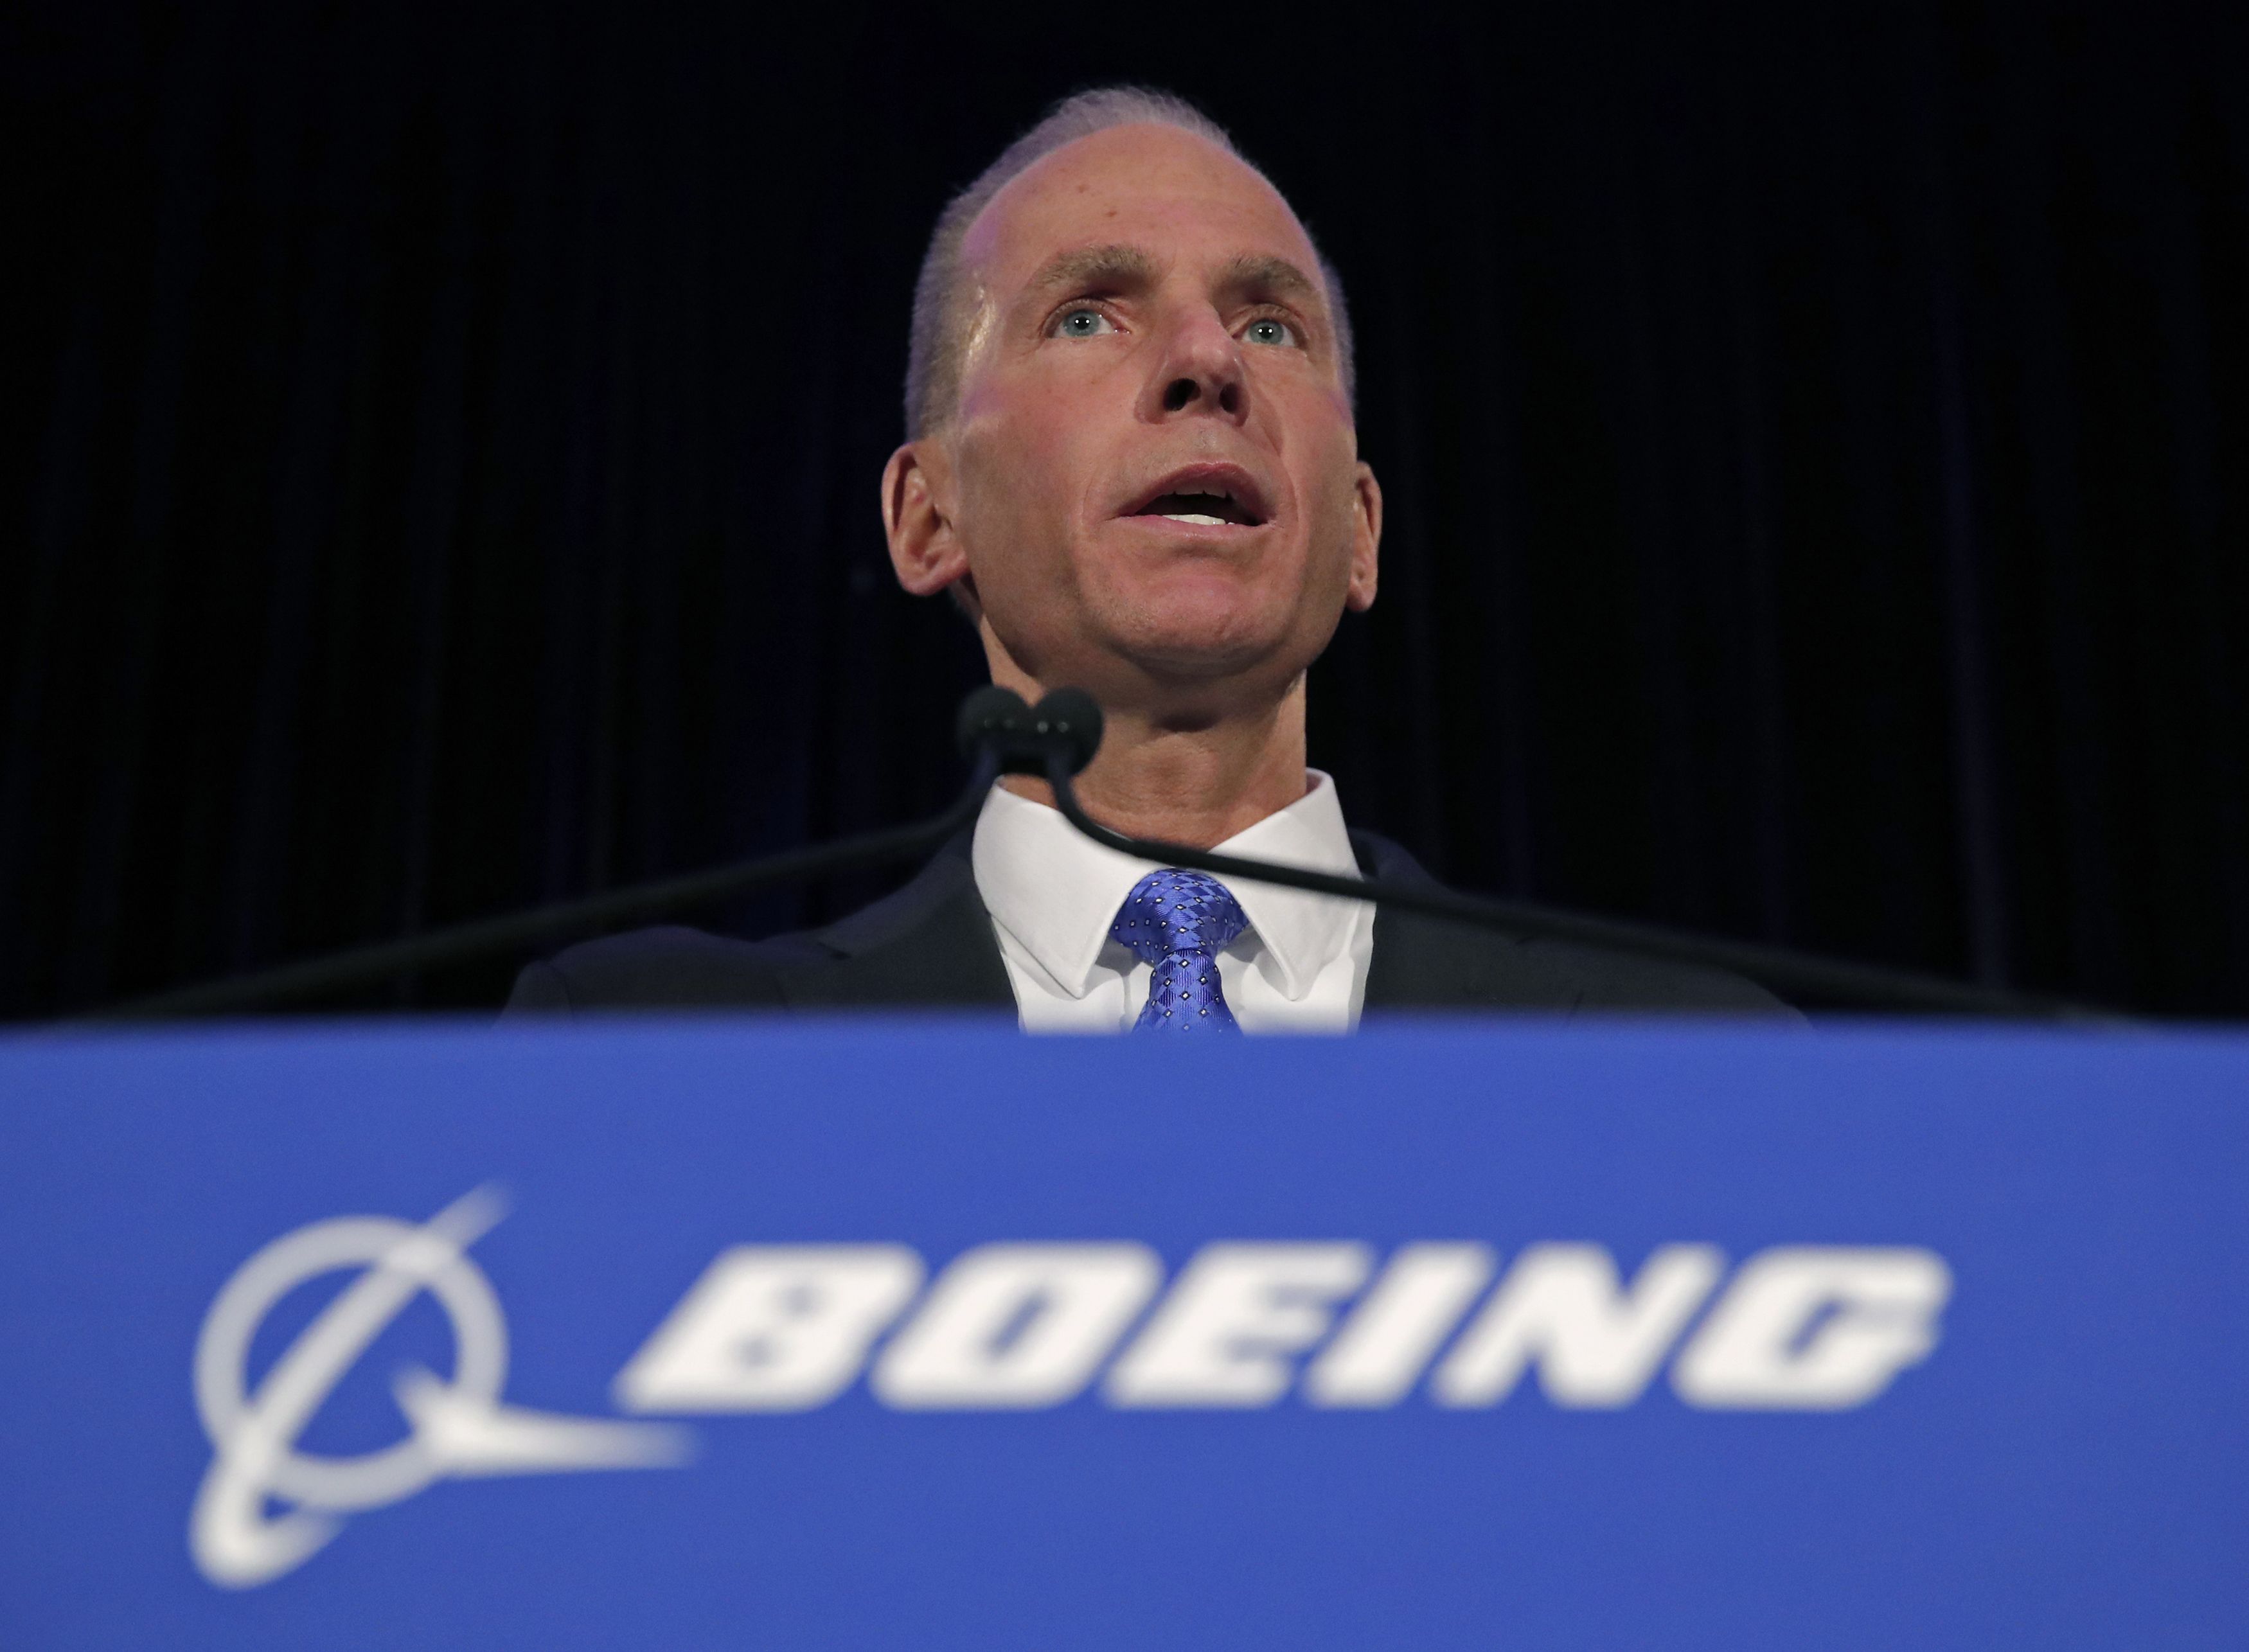 Boeing CEO Dennis Muilenburg loses chairmanship to give attention to 737 Max disaster